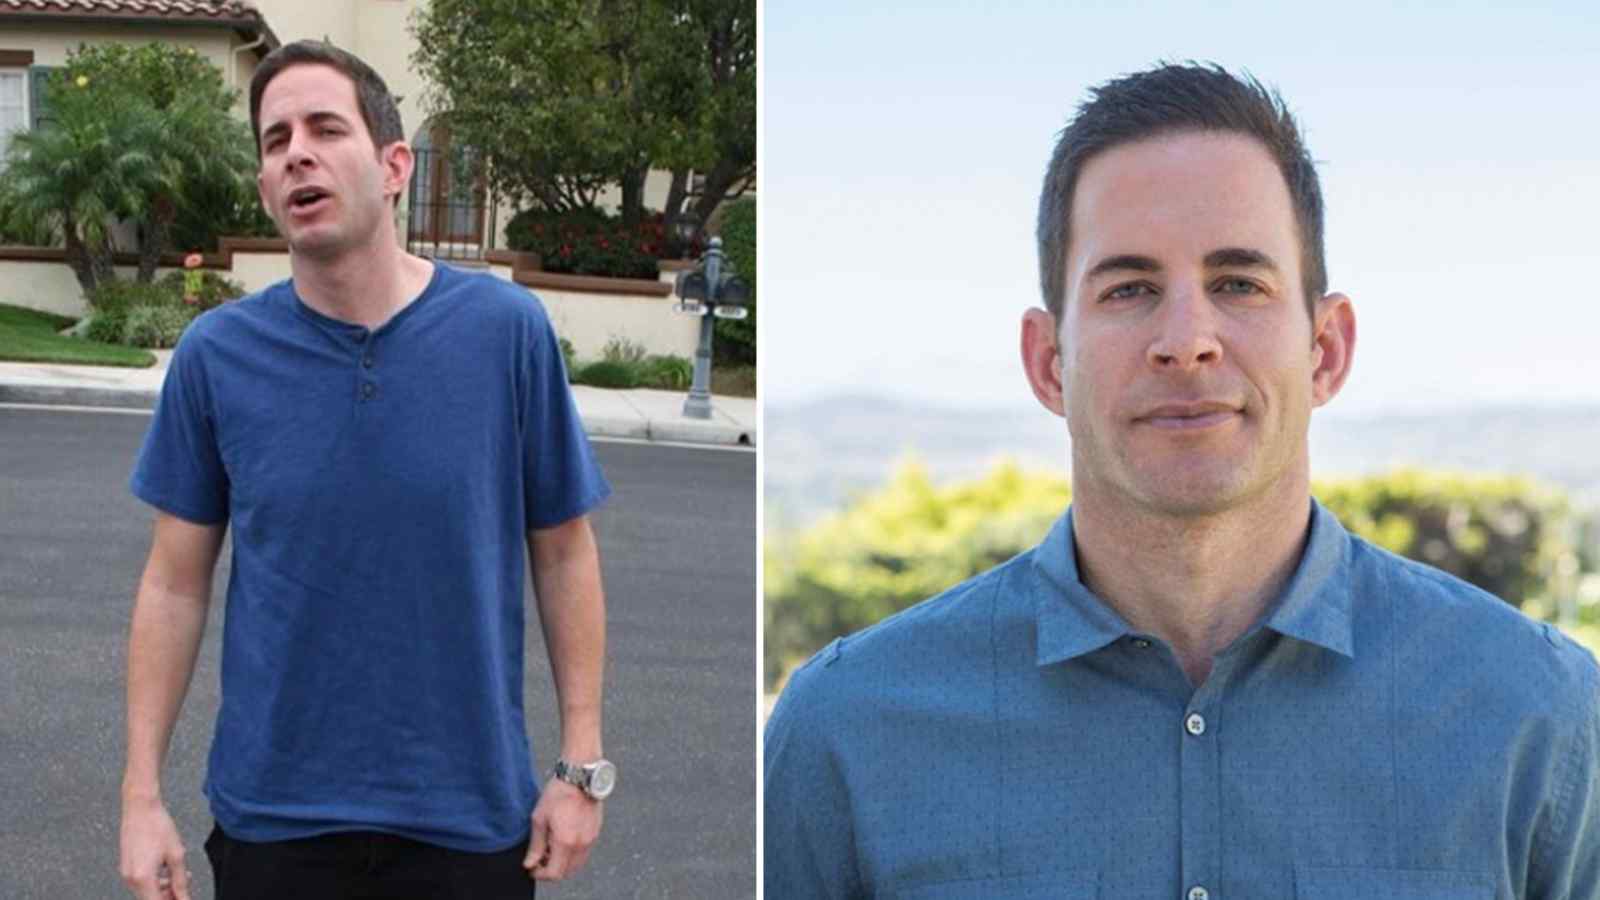 Tarek El Moussa Plastic Surgery: Truth about speculations, health update